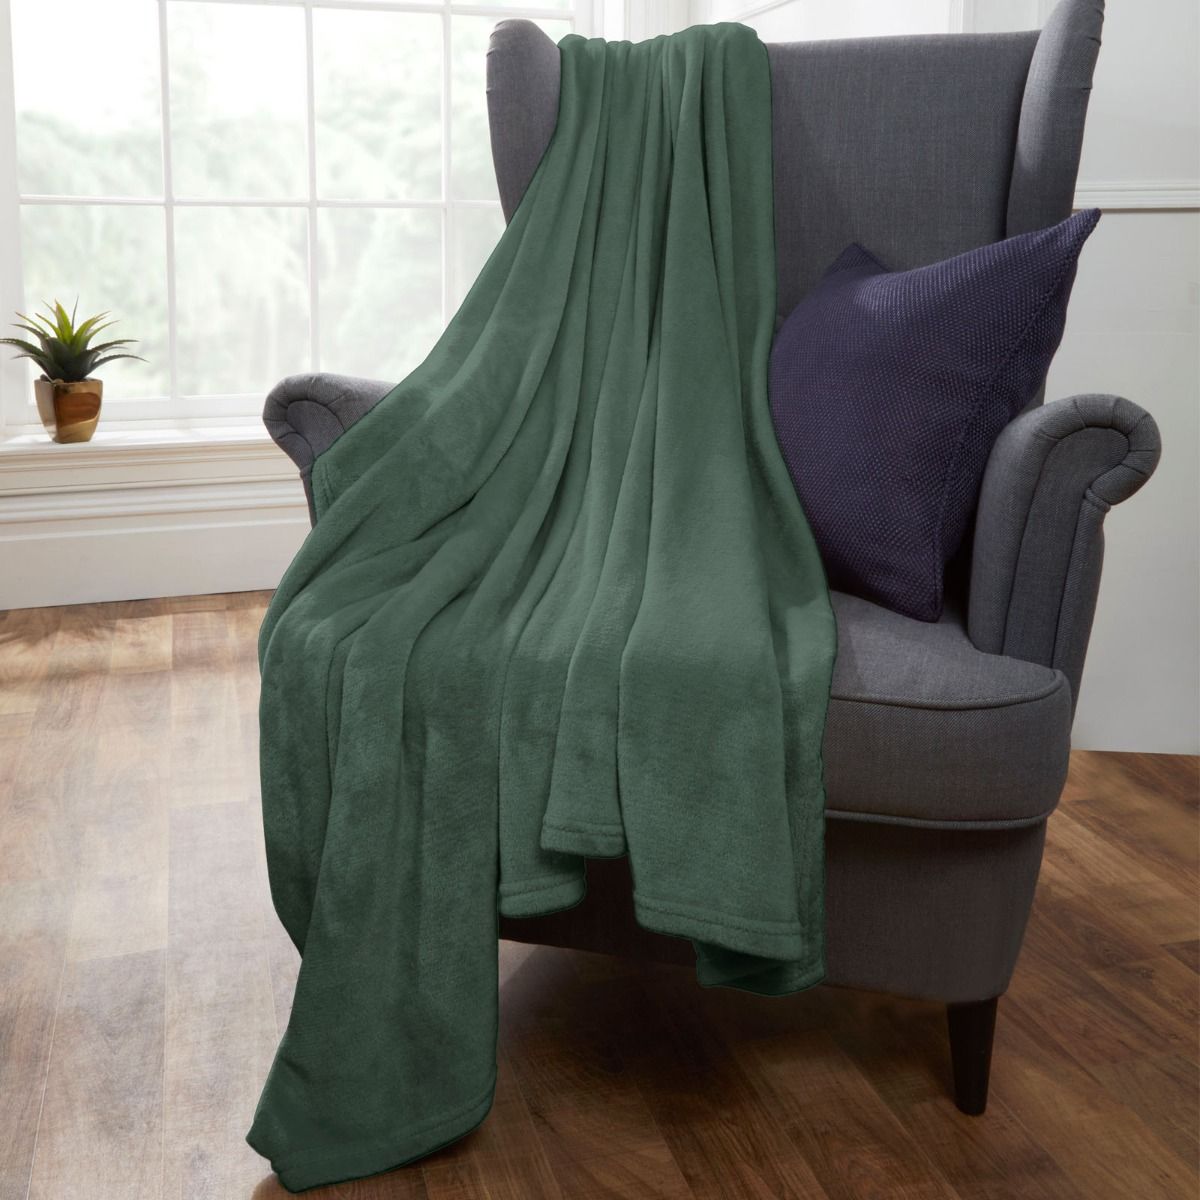 Brentfords Supersoft Throw, Green - 50 x 60 inches